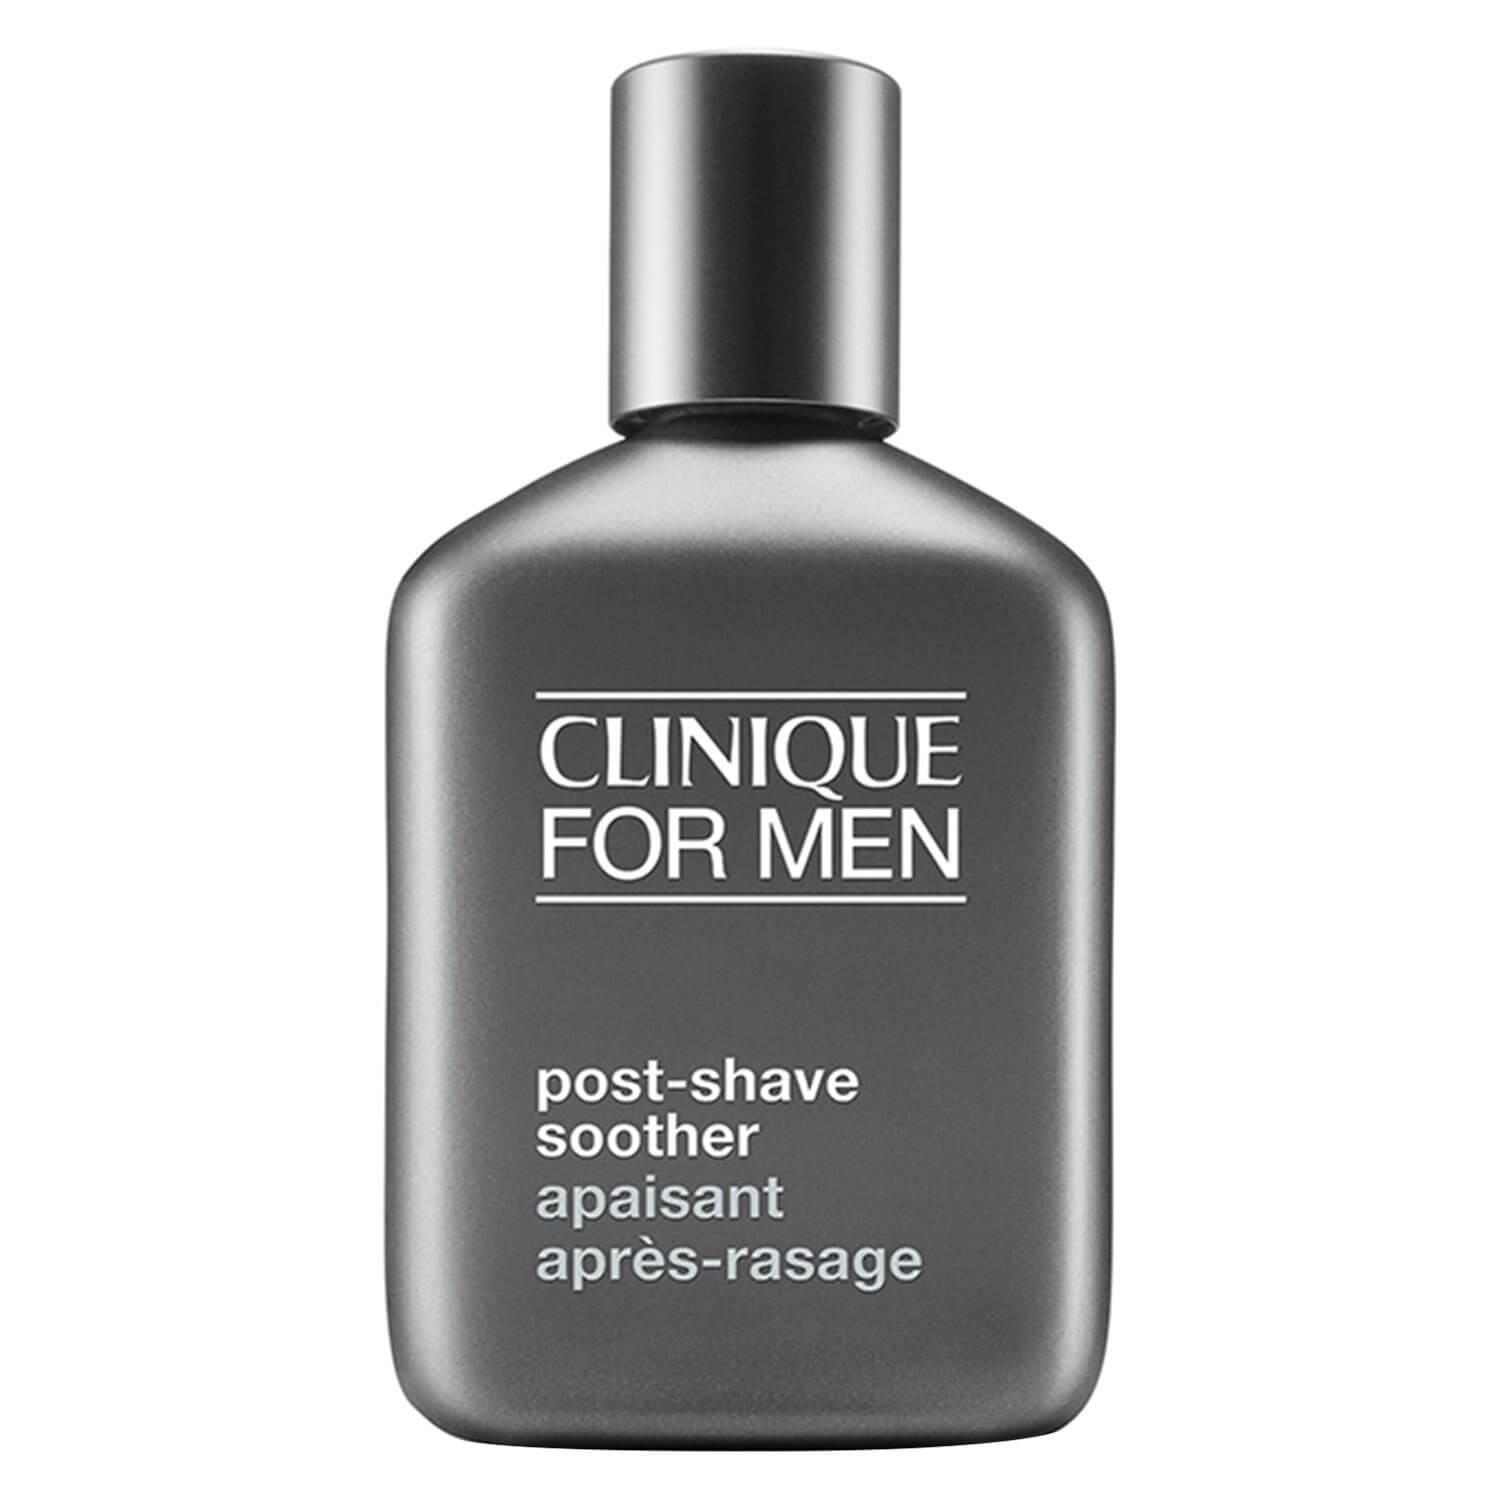 Clinique For Men - Post Shave Soother